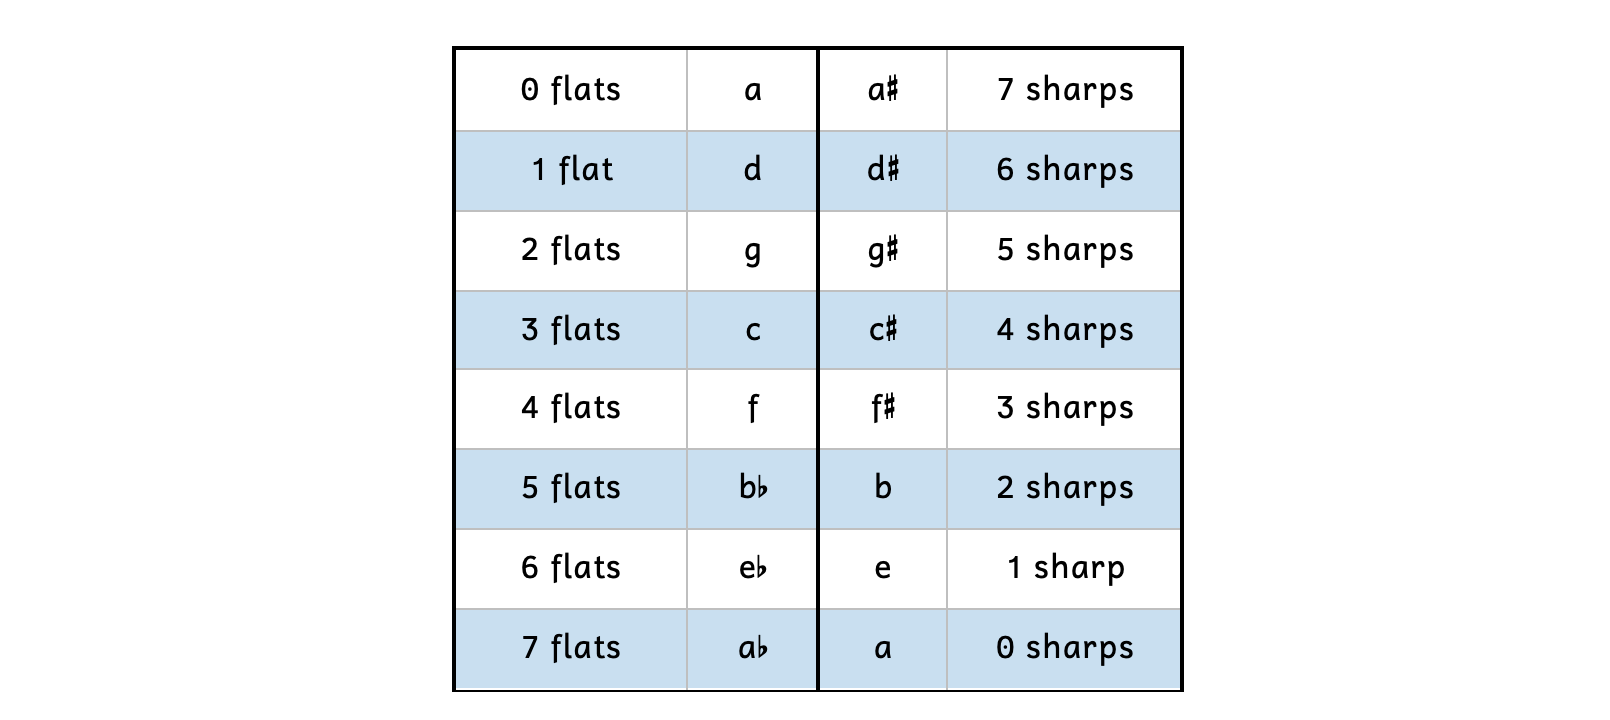 Table illustrating a comparison of minor keys with flats and sharps. A-minor has zero flats and A-sharp minor has seven sharps. D minor has one flat and D-sharp minor has six sharps. G minor has two flats and G-sharp minor has five sharps. C minor has three flats and C-sharp minor has four sharps. F minor has four flats and F-sharp minor has three sharps. B-flat minor has five flats and B minor has two sharps. E-flat minor has six flats and E minor has one sharp. A-flat minor has seven flats and A-minor has zero sharps.